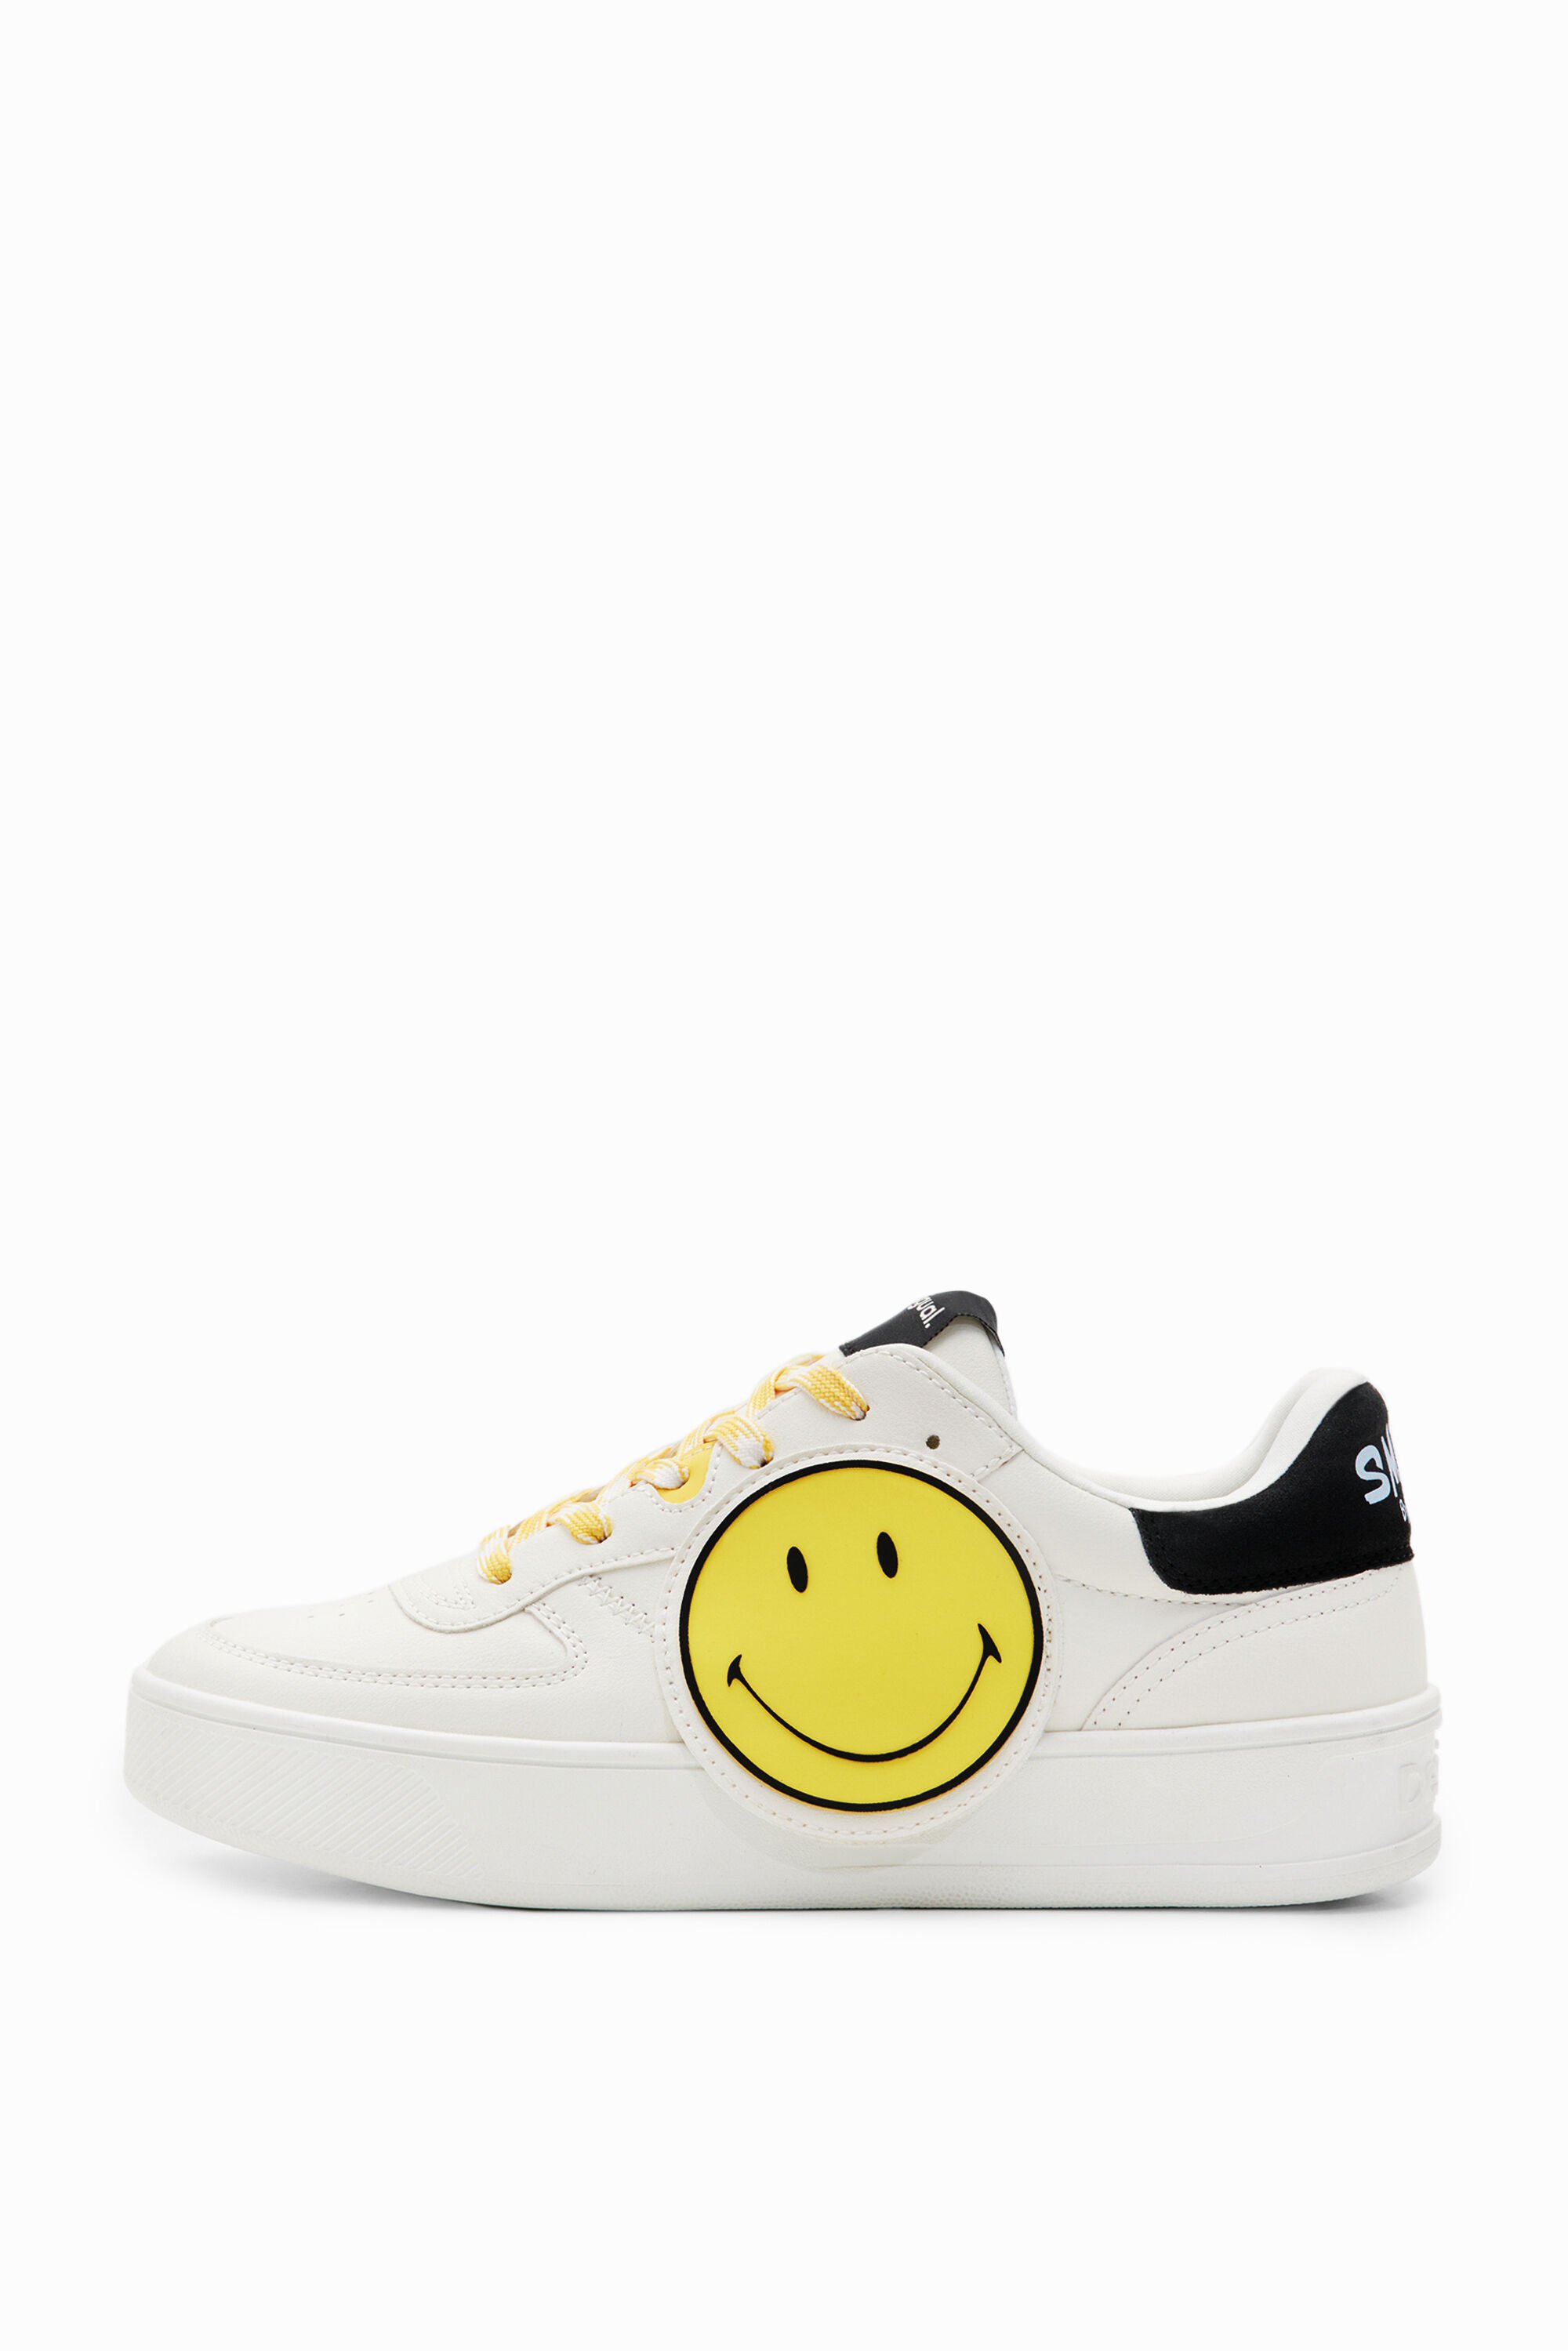 Desigual Smiley® Platform Sneakers In Material Finishes